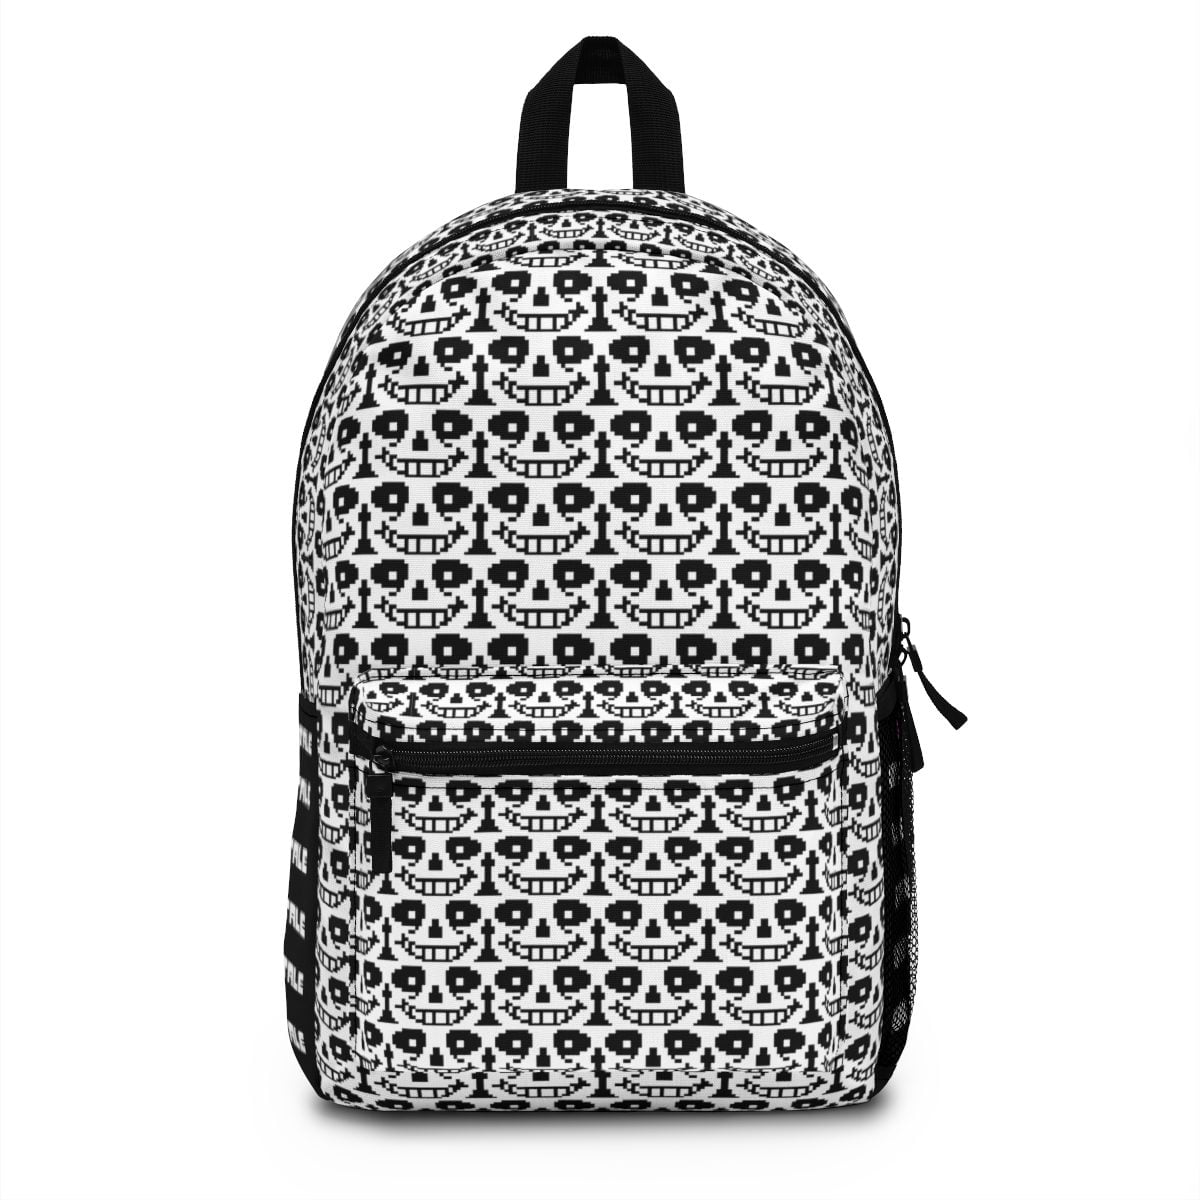 Undertale 2 (Shadows of Time) Monochromatic Backpack Cool Kiddo 10